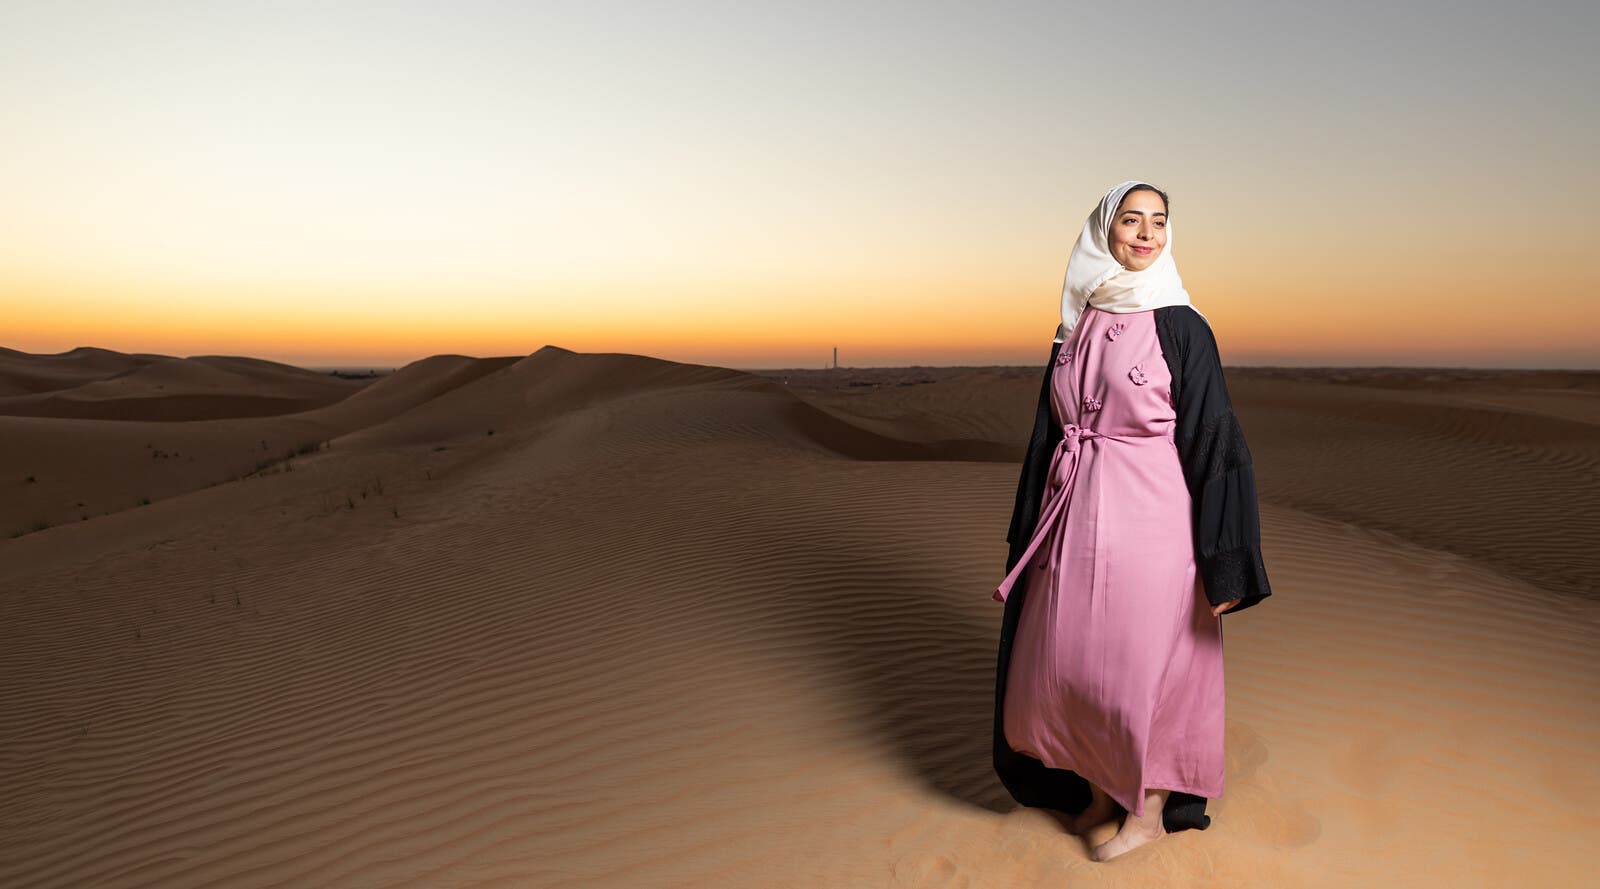 Dalia, stood in the desert with the sun setting.